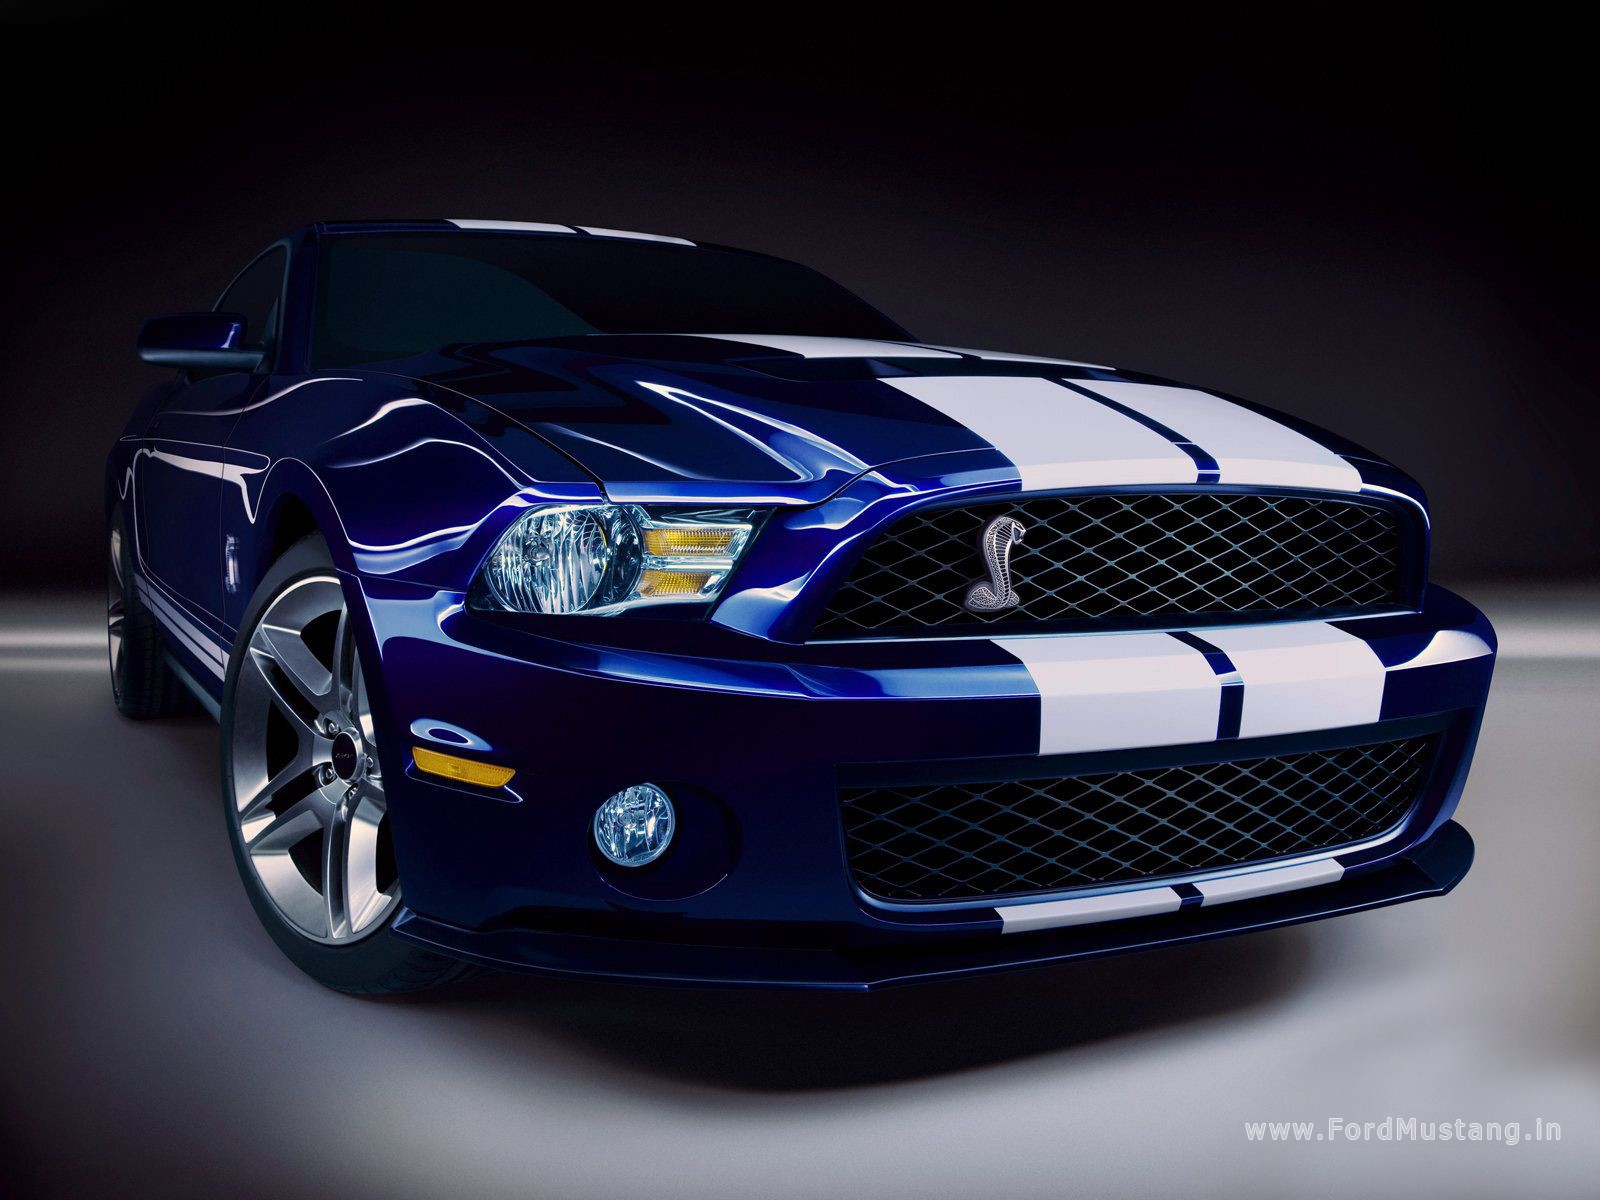 Ford 2011 on Ford Mustang Shelby Gt500  2010  Wallpapers   Ford Mustang  Ford